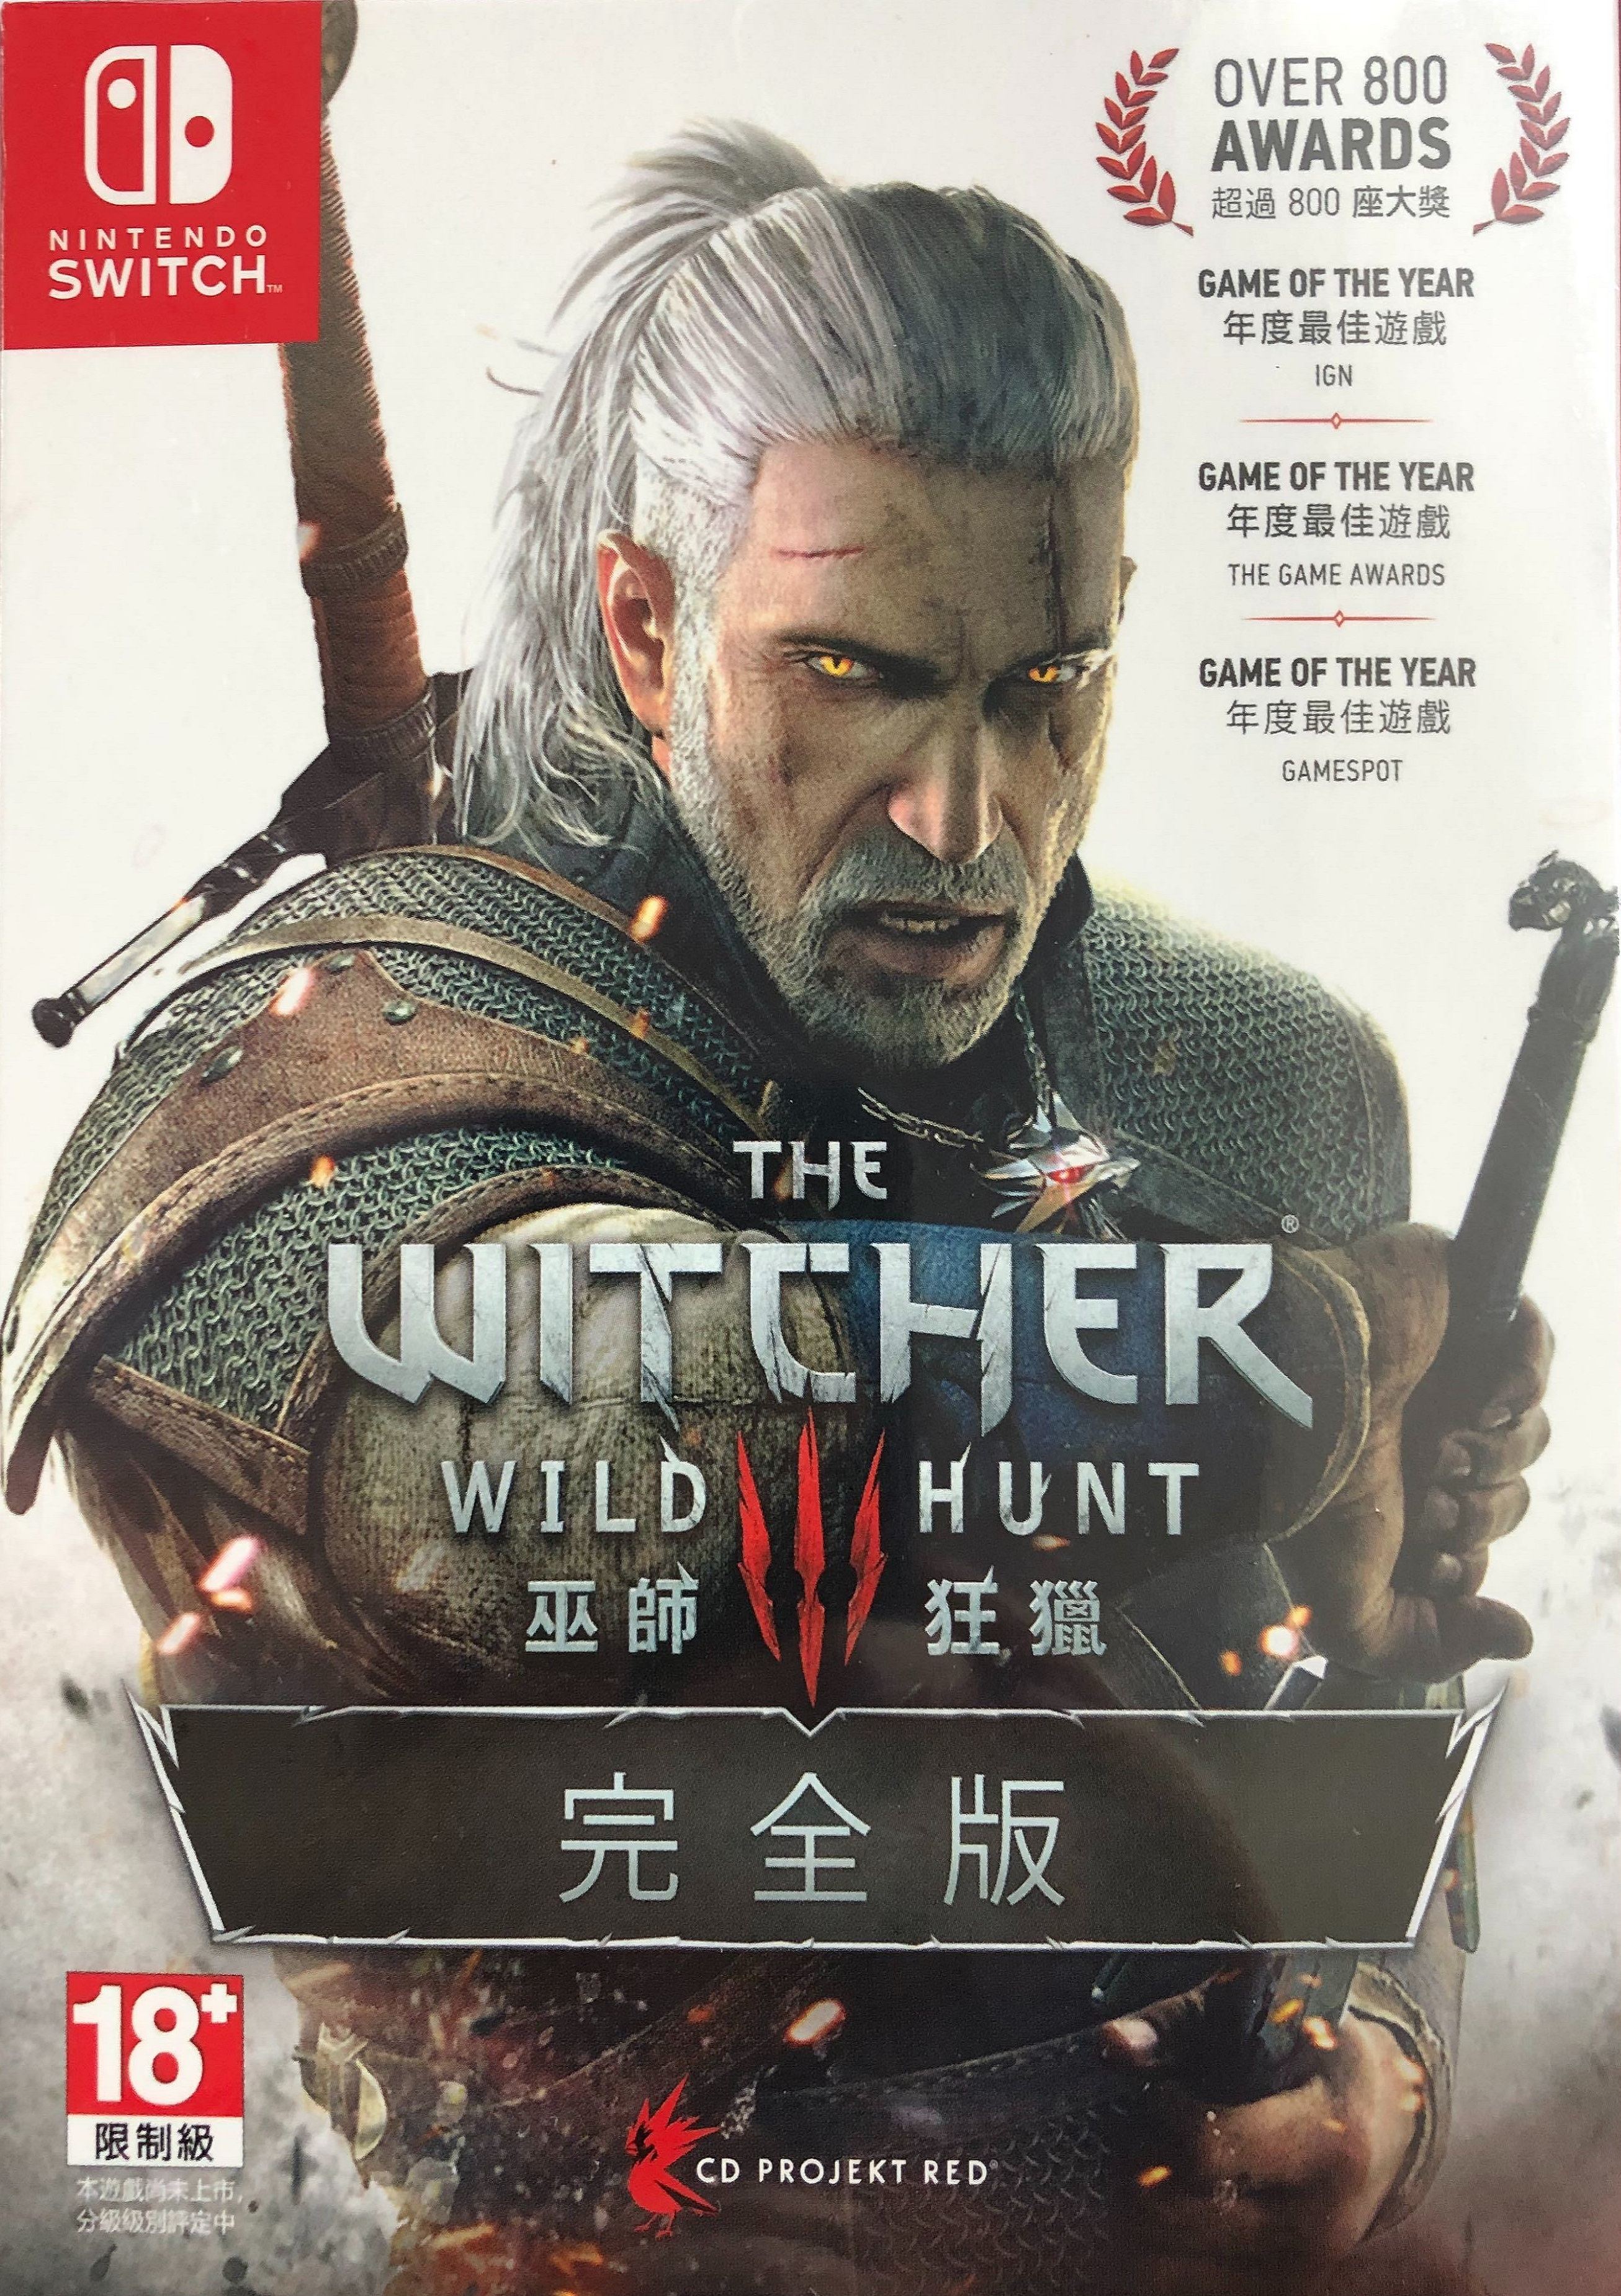 the witcher 3 complete edition switch